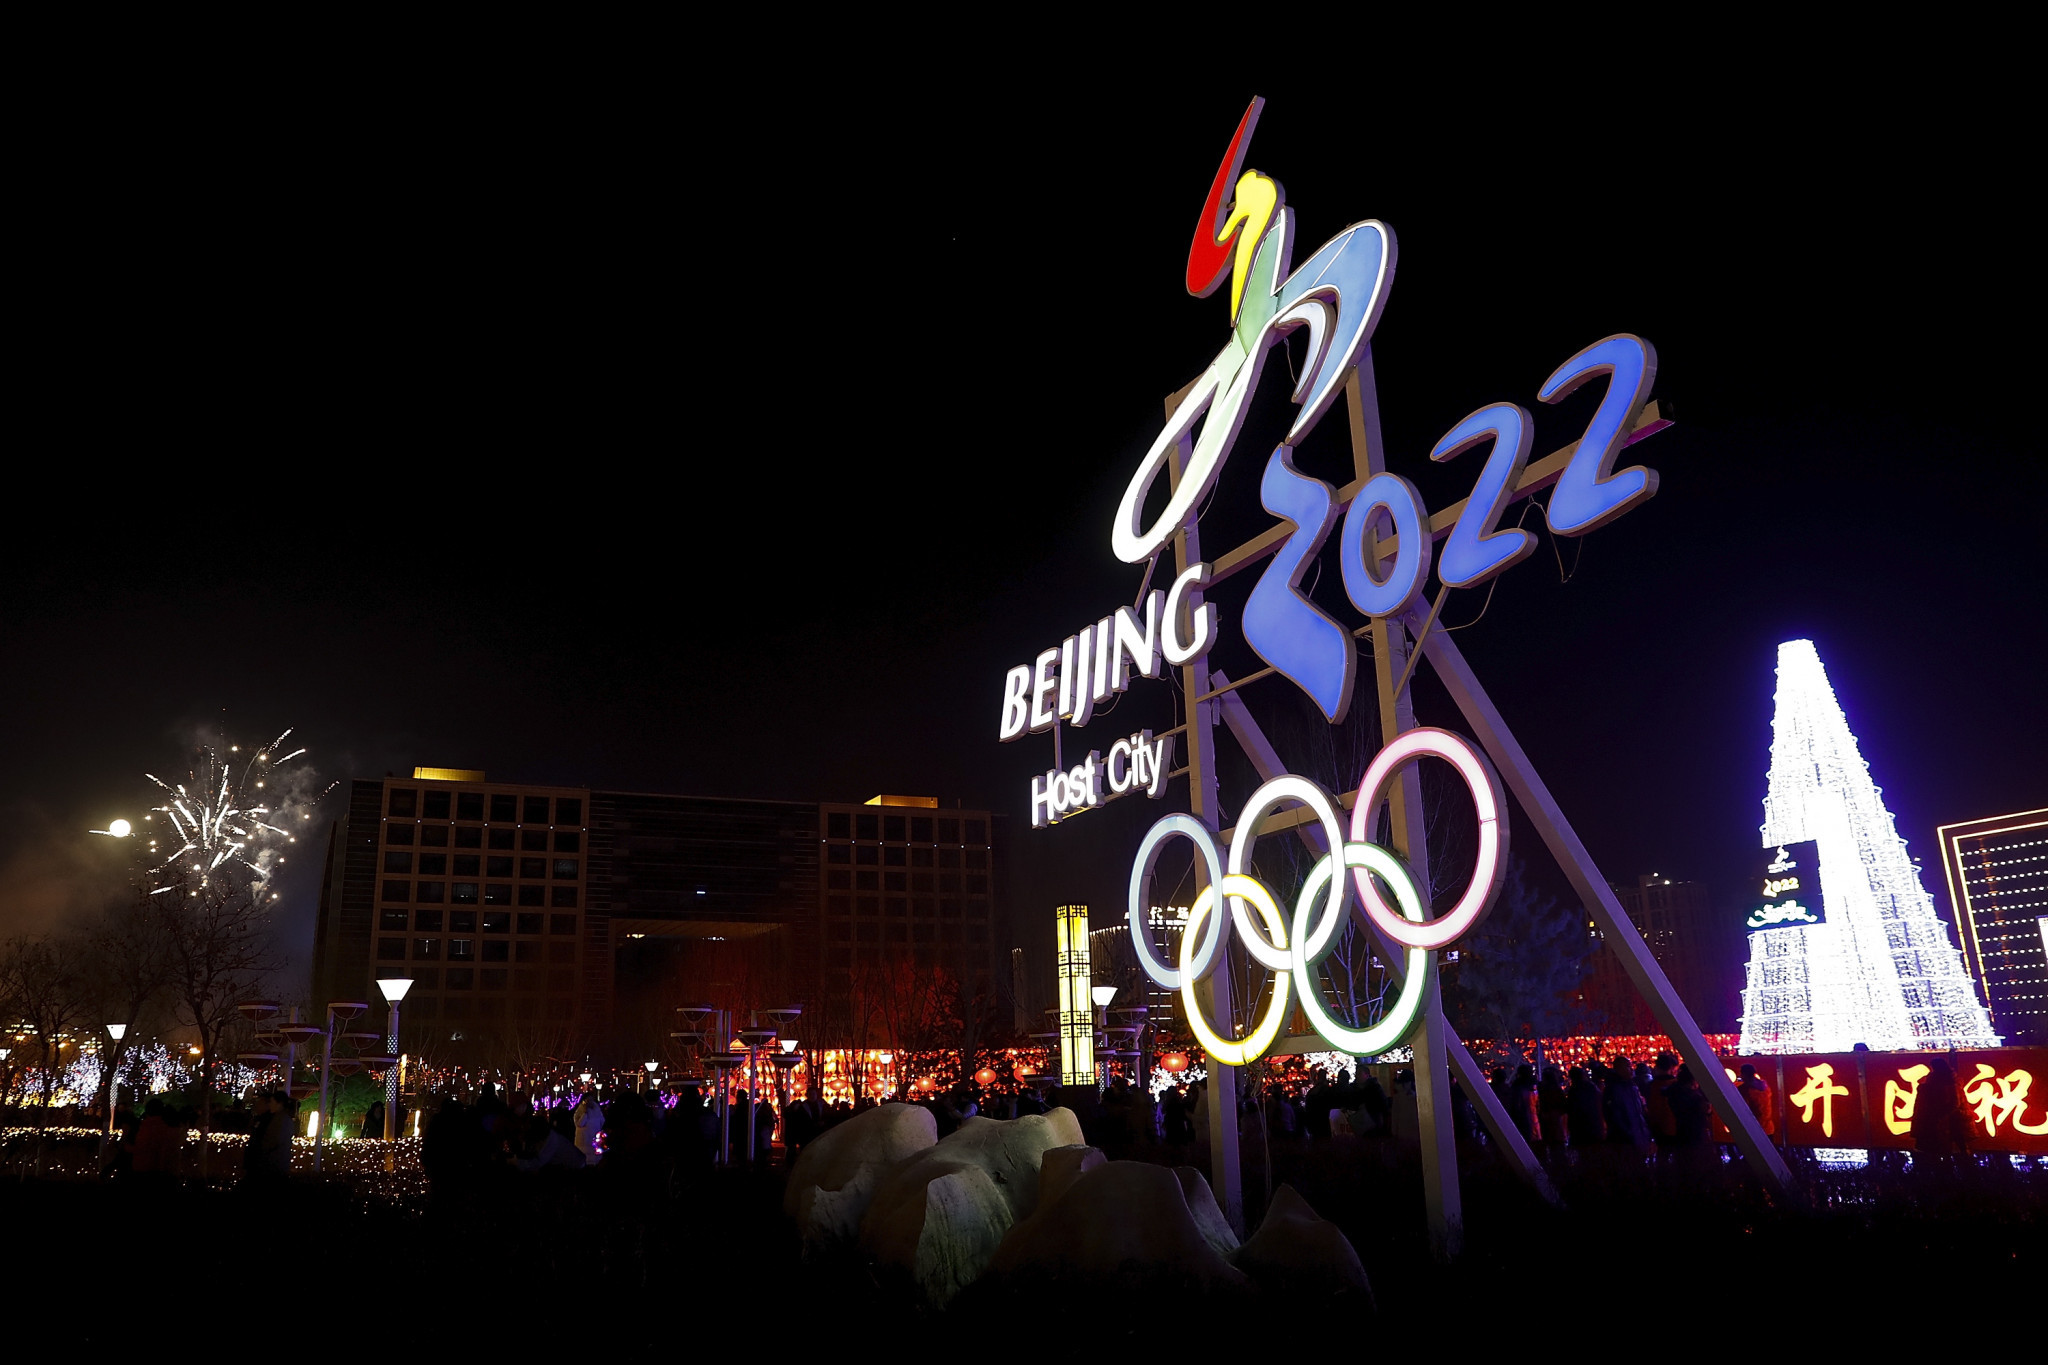 Beijing 2022 Winter Olympic venues in Zhangjiakou set for completion before end of 2019, top official claims